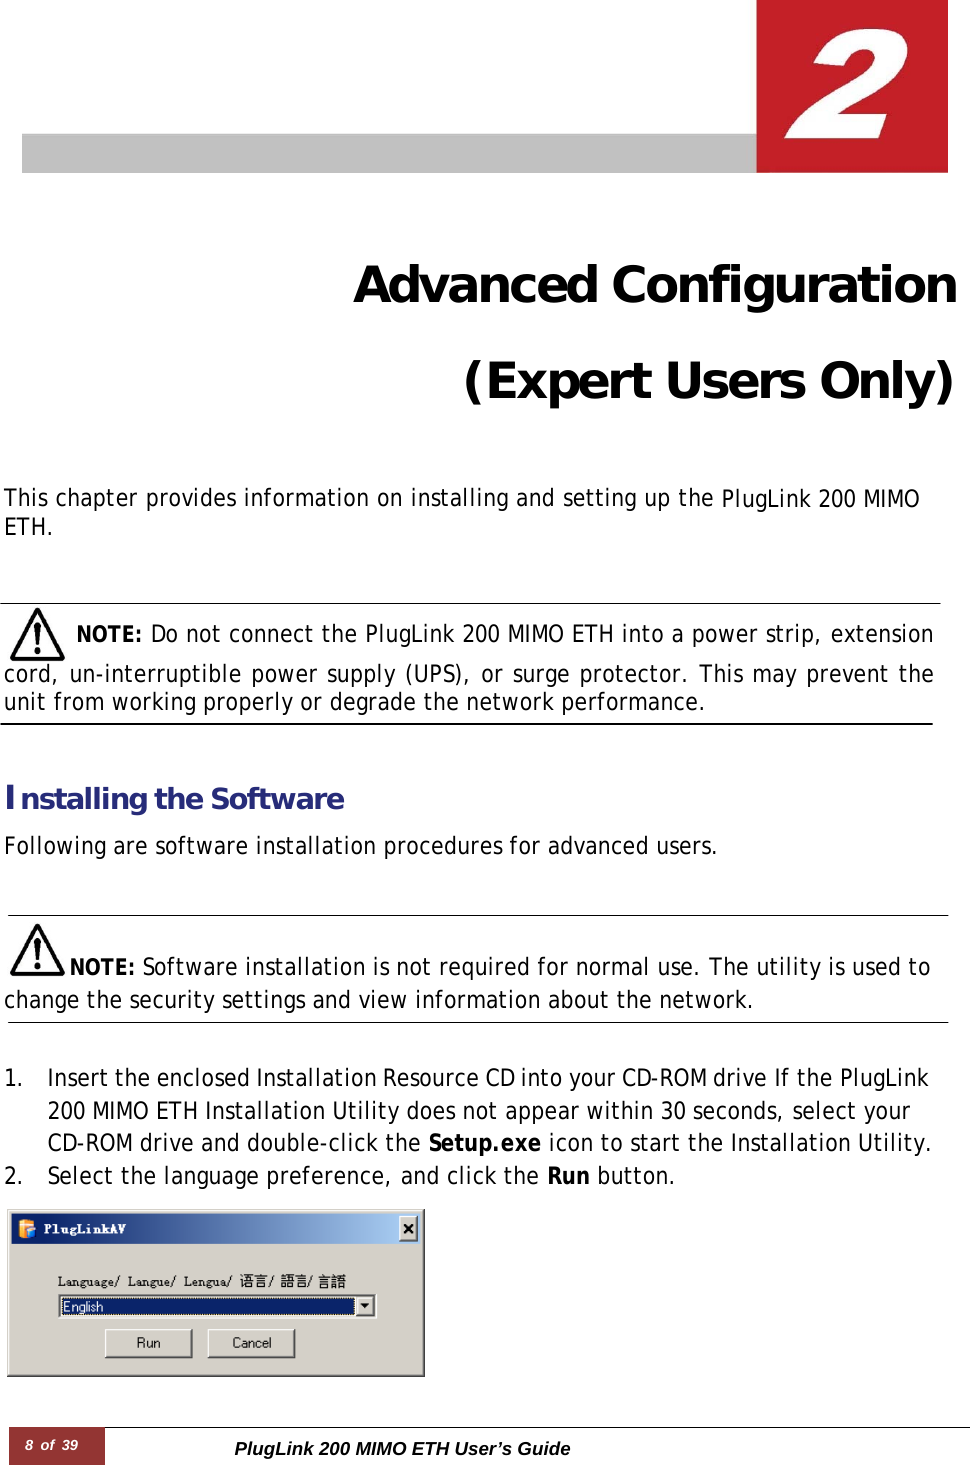 8 of 39 PlugLink 200 MIMO ETH User’s Guide            Advanced Configuration (Expert Users Only)   This chapter provides information on installing and setting up the PlugLink 200 MIMO ETH.      NOTE: Do not connect the PlugLink 200 MIMO ETH into a power strip, extension cord, un-interruptible power supply (UPS), or surge protector. This may prevent the unit from working properly or degrade the network performance.    Installing the Software  Following are software installation procedures for advanced users.    NOTE: Software installation is not required for normal use. The utility is used to change the security settings and view information about the network.   1. Insert the enclosed Installation Resource CD into your CD-ROM drive If the PlugLink 200 MIMO ETH Installation Utility does not appear within 30 seconds, select your CD-ROM drive and double-click the Setup.exe icon to start the Installation Utility. 2. Select the language preference, and click the Run button.  